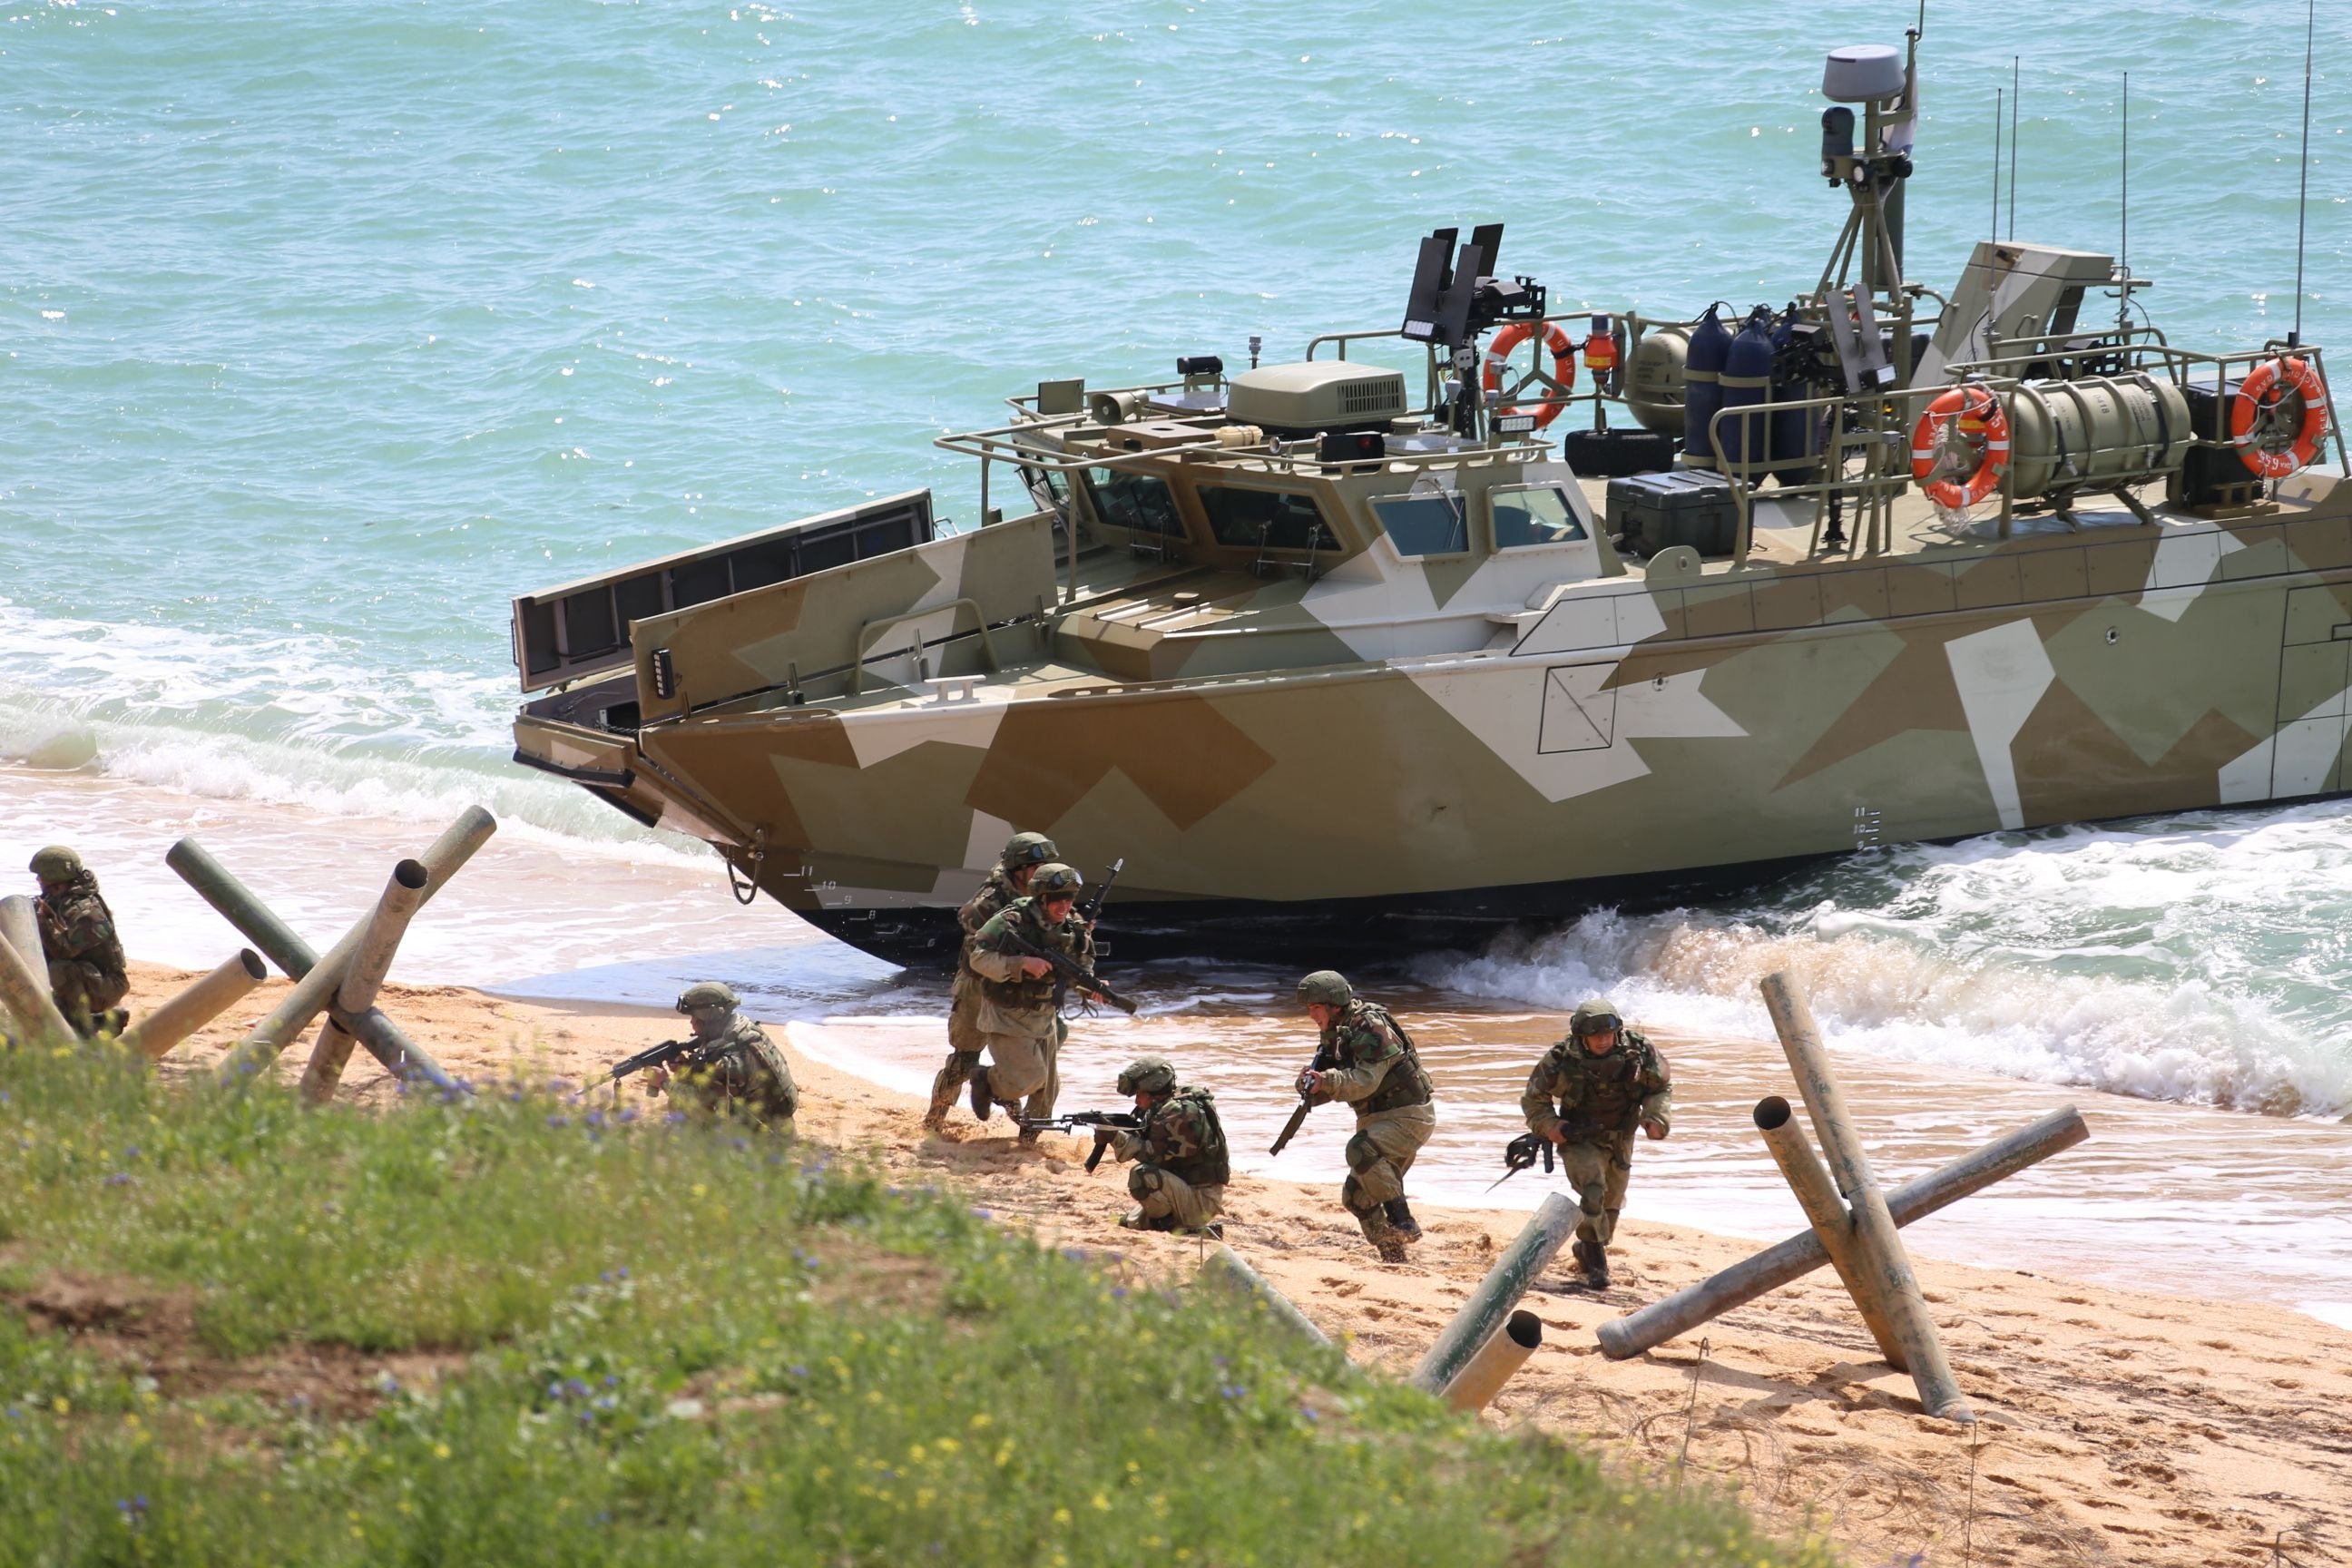 Russian forces landing ashore during a military drill along the Opuk training ground not far from the town of Kerch, on the Kerch Peninsula in the east of Crimea, in this handout picture released by the Russian Defense Ministry on April 22, 2021. (Photo by Vadim Savitsky / Russian Defense Ministry / AFP)